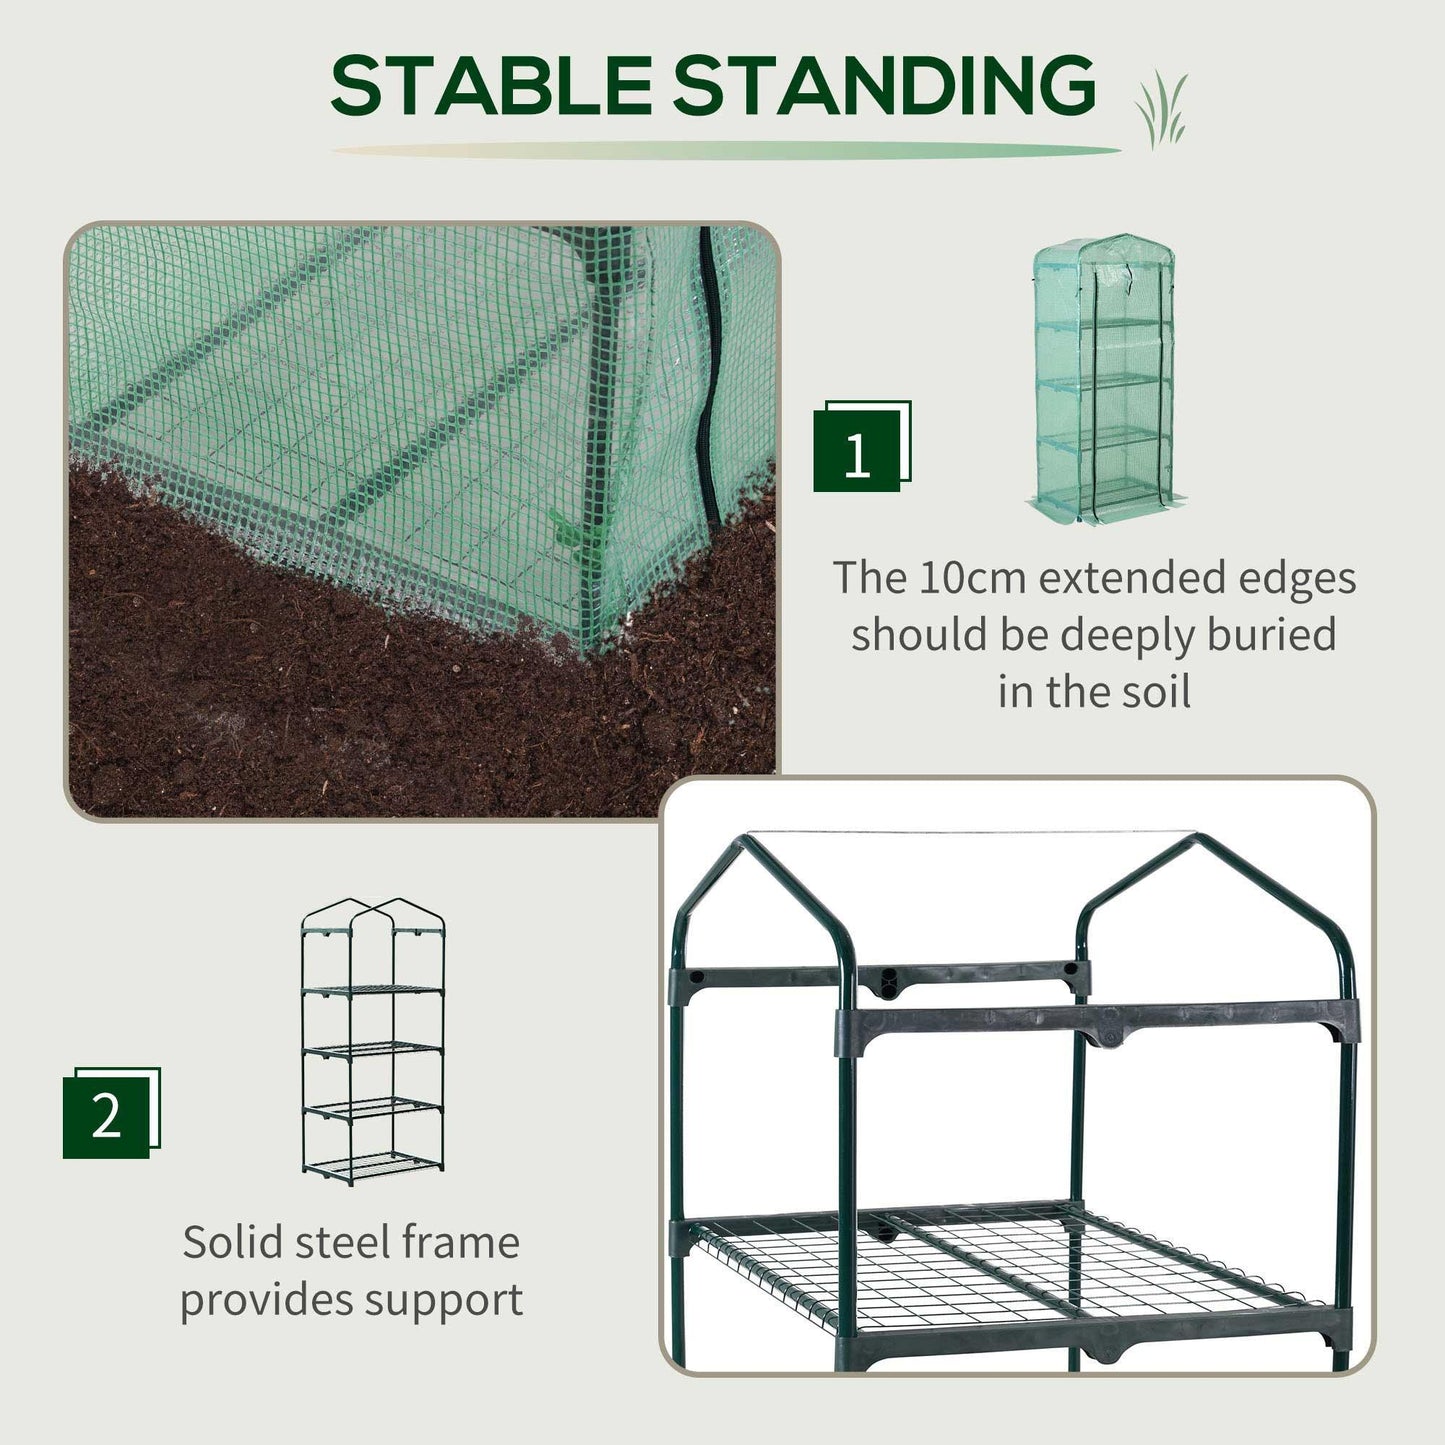 Outsunny Portable Greenhouse Shed - 4 Tiers, Metal Frame, PE Cover - ALL4U RETAILER LTD